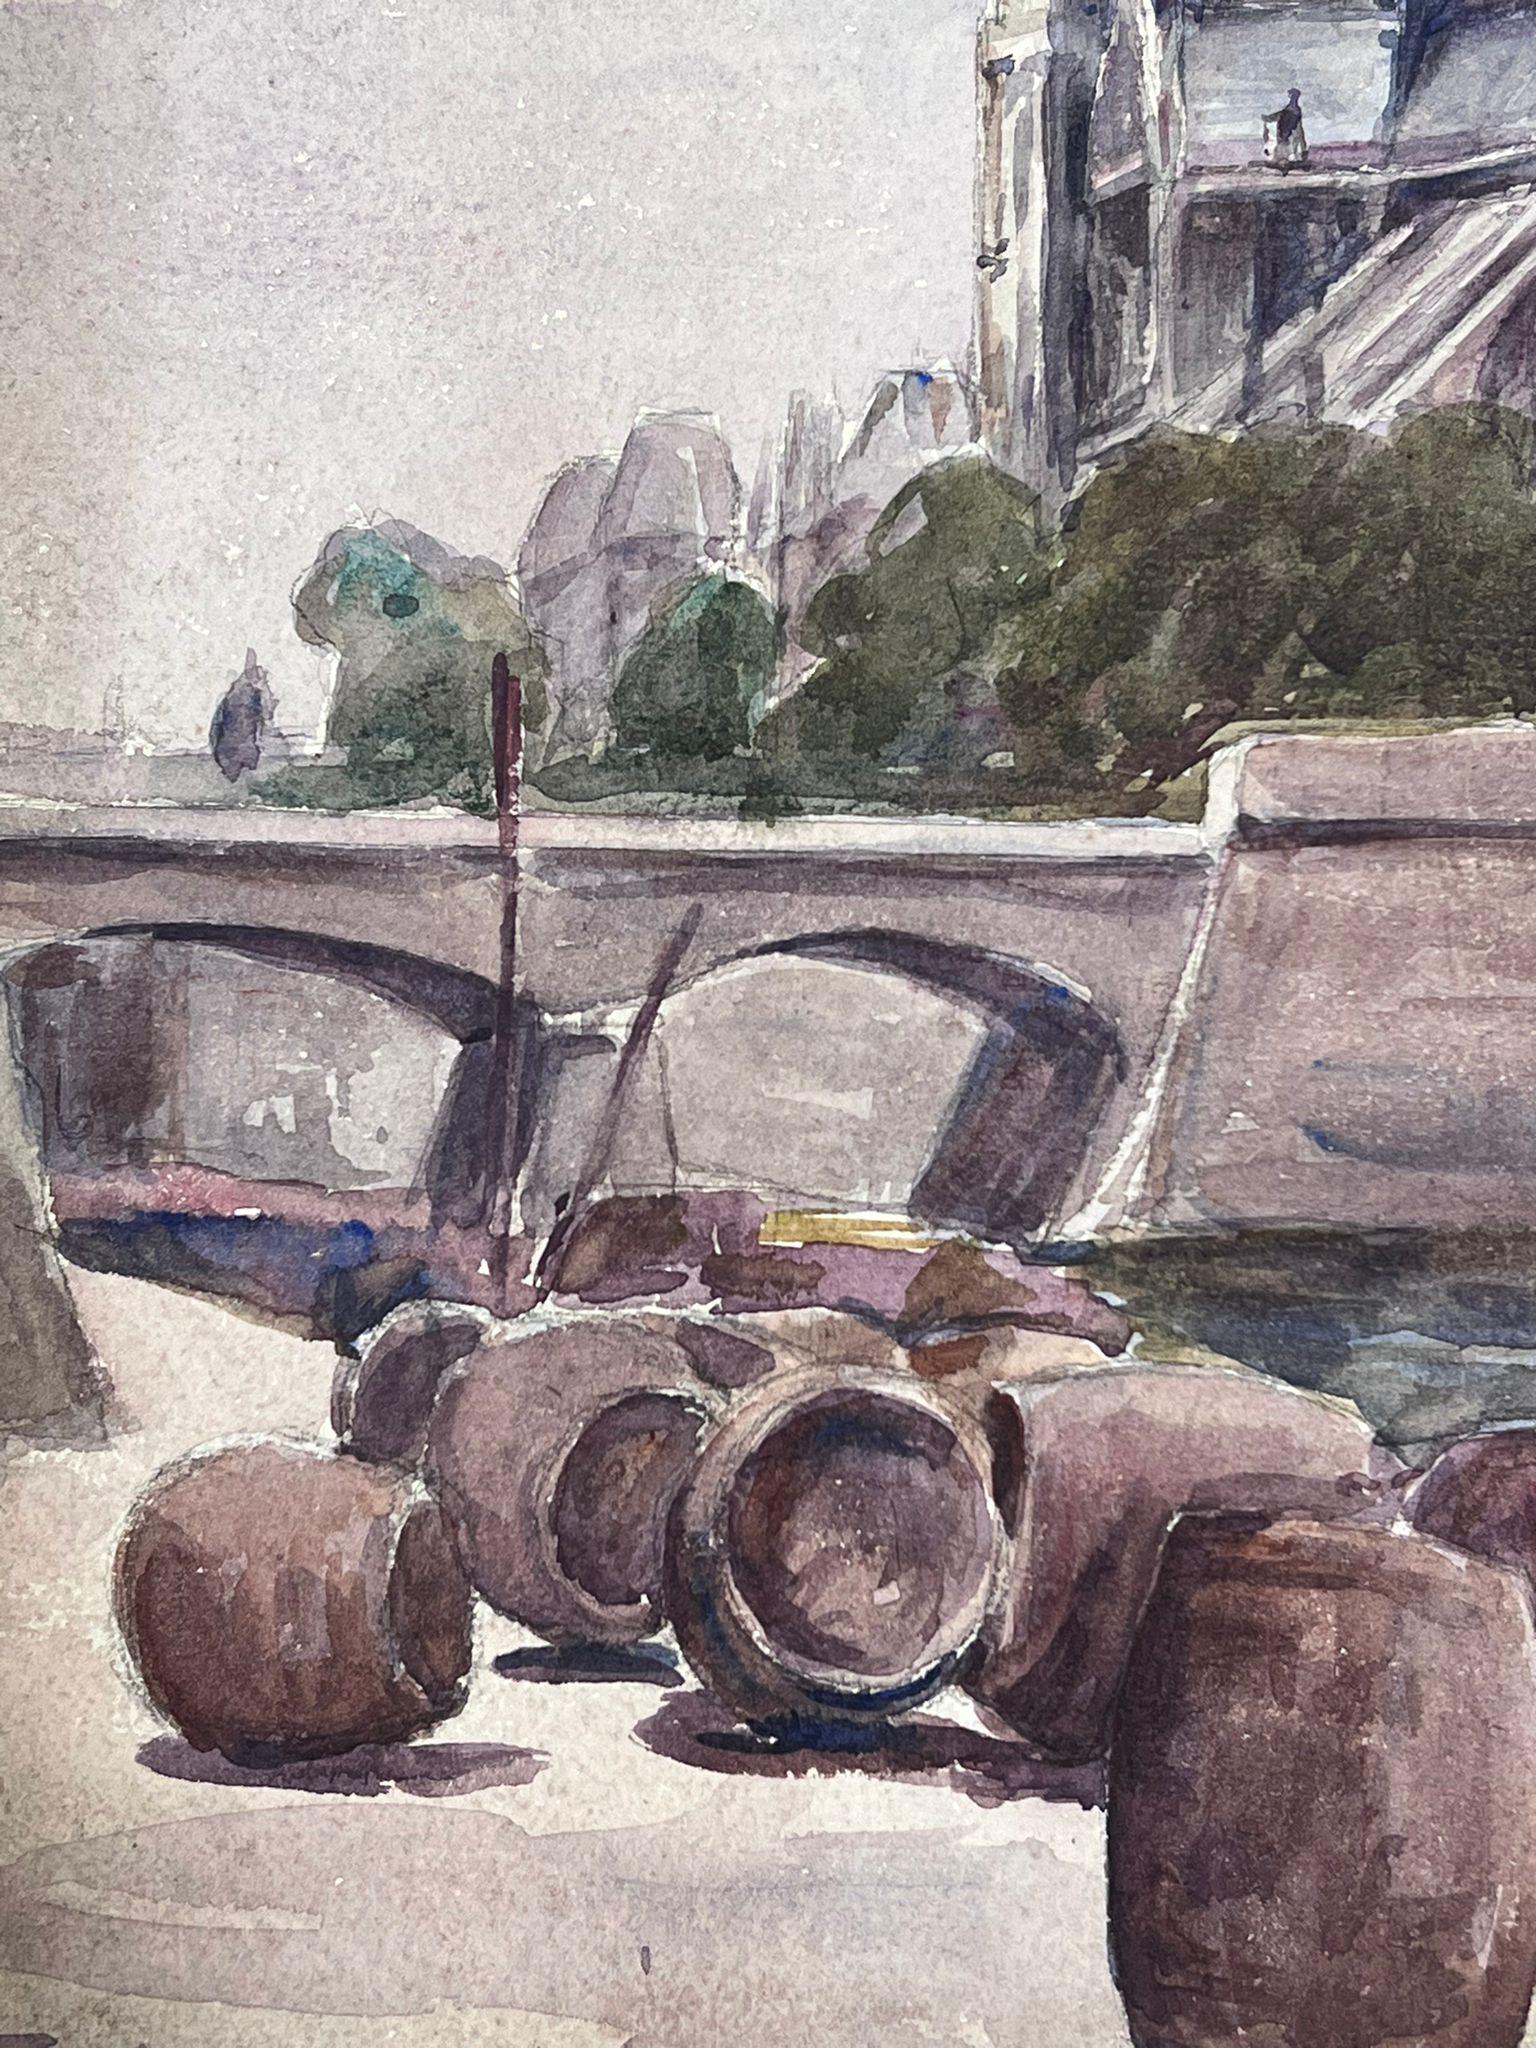 Notre Damme Barrels Along The River Seine Bank 1930's French Landscape - Painting by Louise Alix